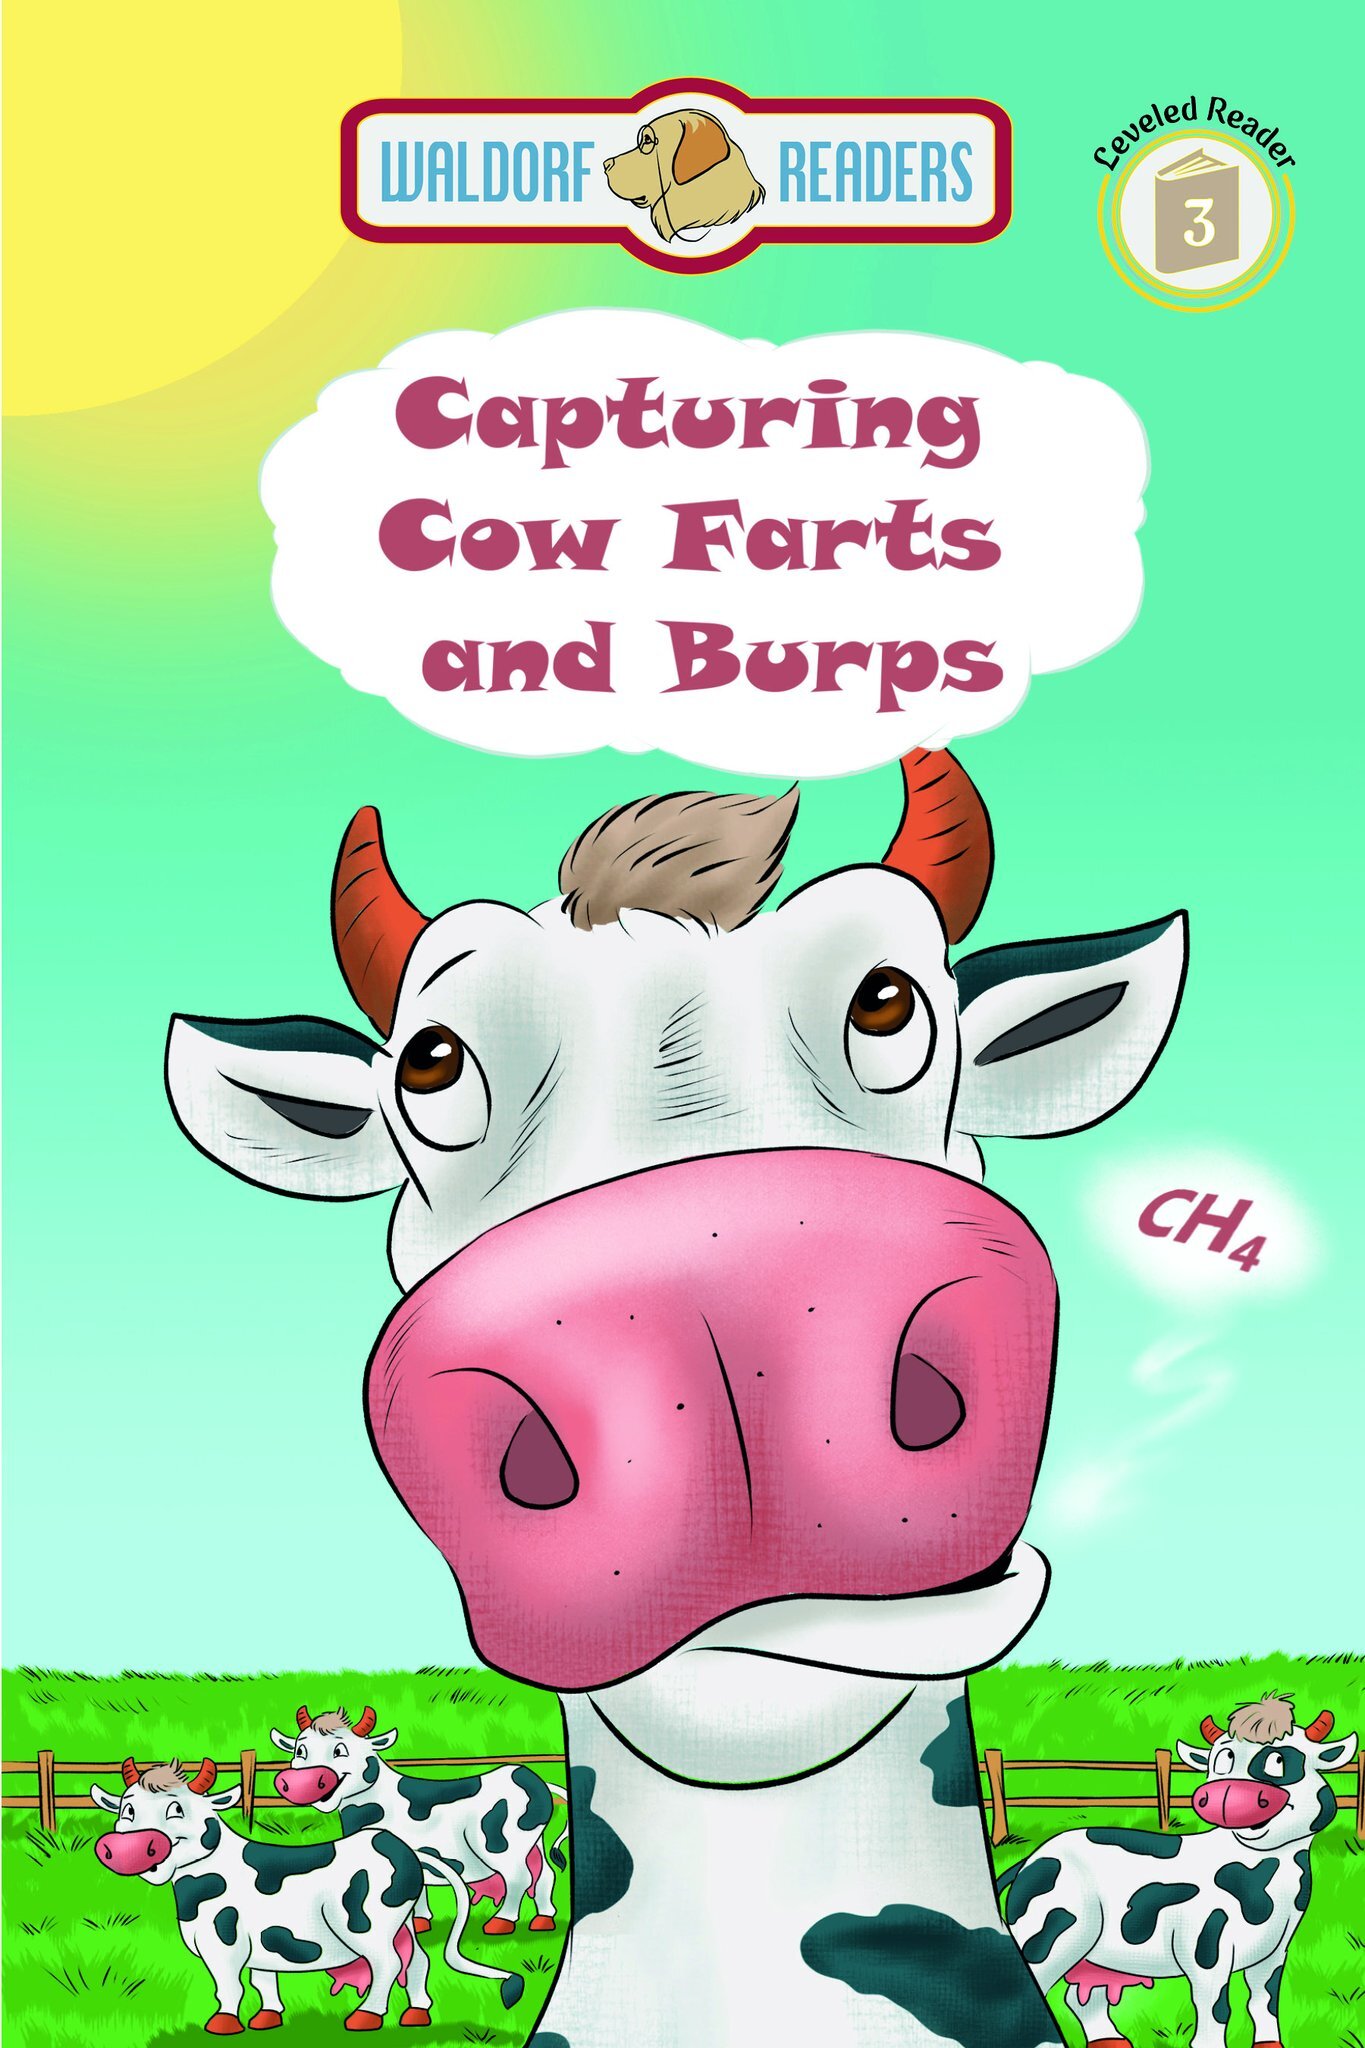 Cow_Farts_Front_Cover_1024x1024@2x.jpg